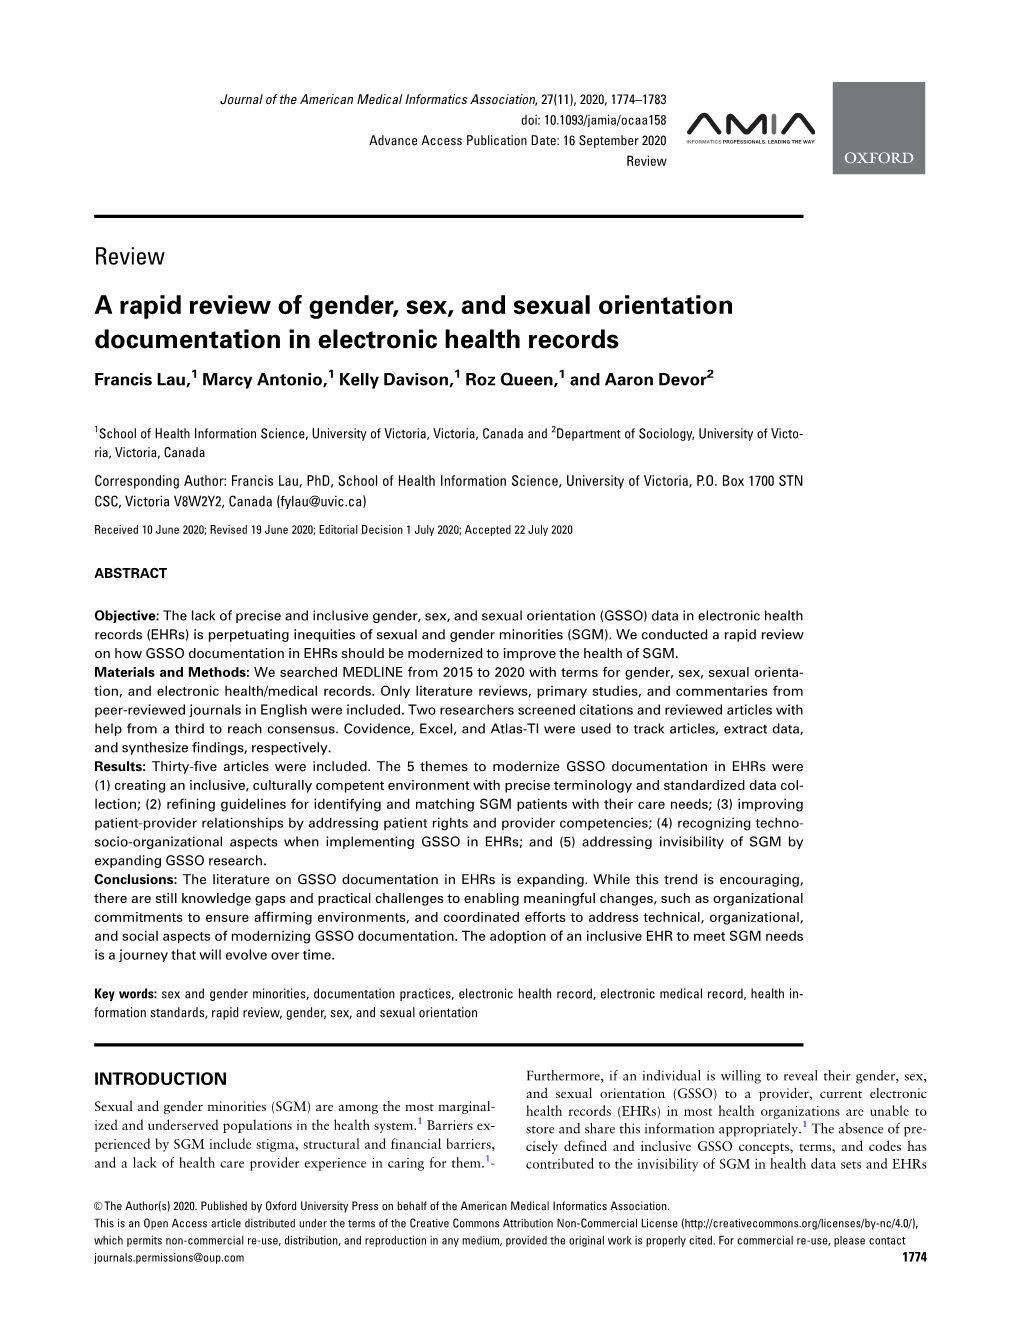 A Rapid Review of Gender, Sex, and Sexual Orientation Documentation in Electronic Health Records